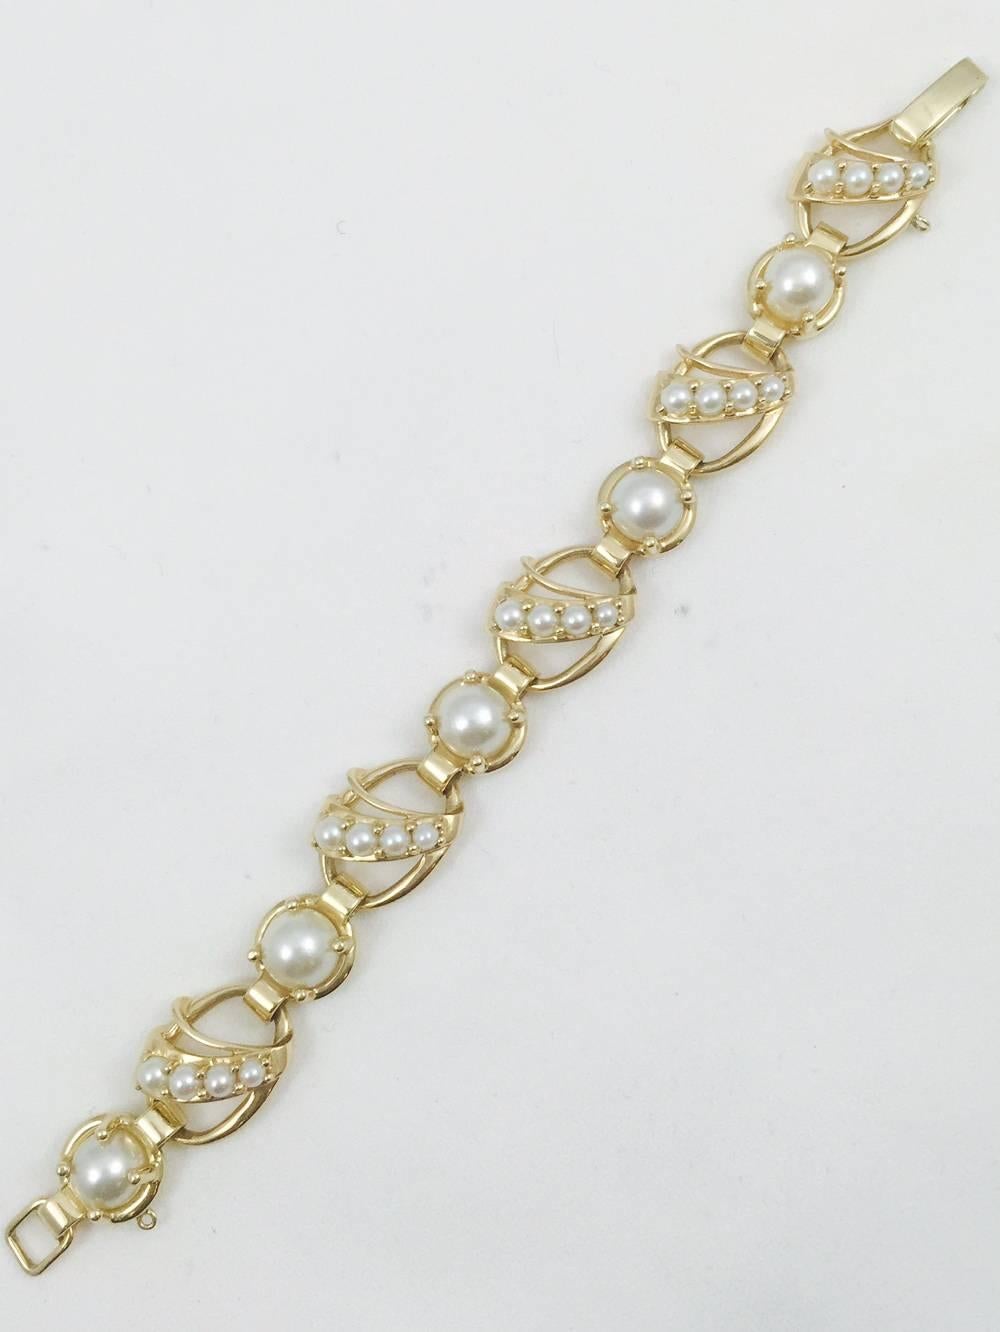 A fantastic bracelet as classic today as it was 50 years ago!  All pearls are beautifully matched for lustre and tint.  Individually prong set with graduated sizes enhancing the open links.  A secure snap down clasp.  Pearls are an essential part of